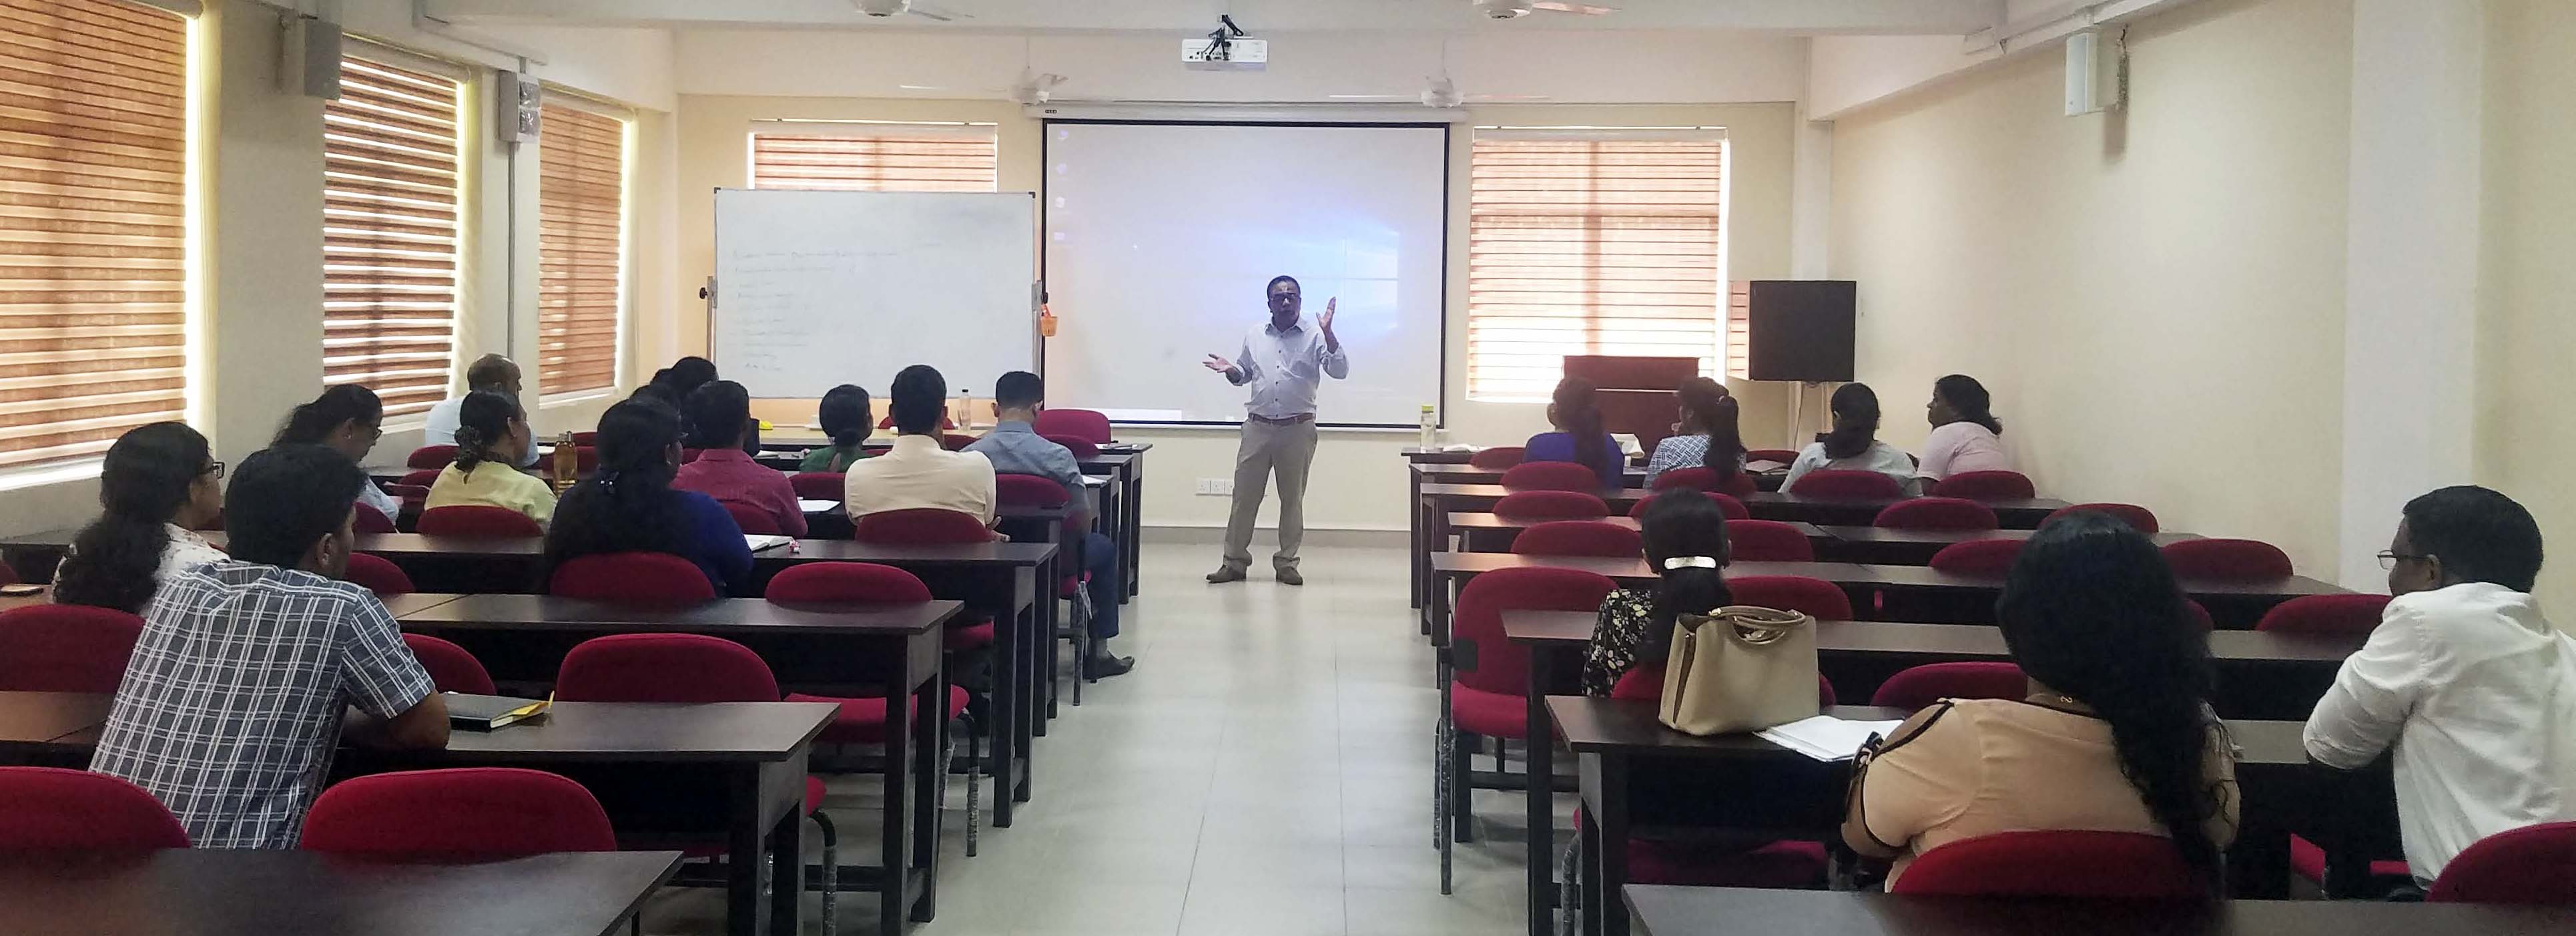 Associate Prof. Mohan Thite, Griffith Business School, Griffith University, Australia visited the Faculty